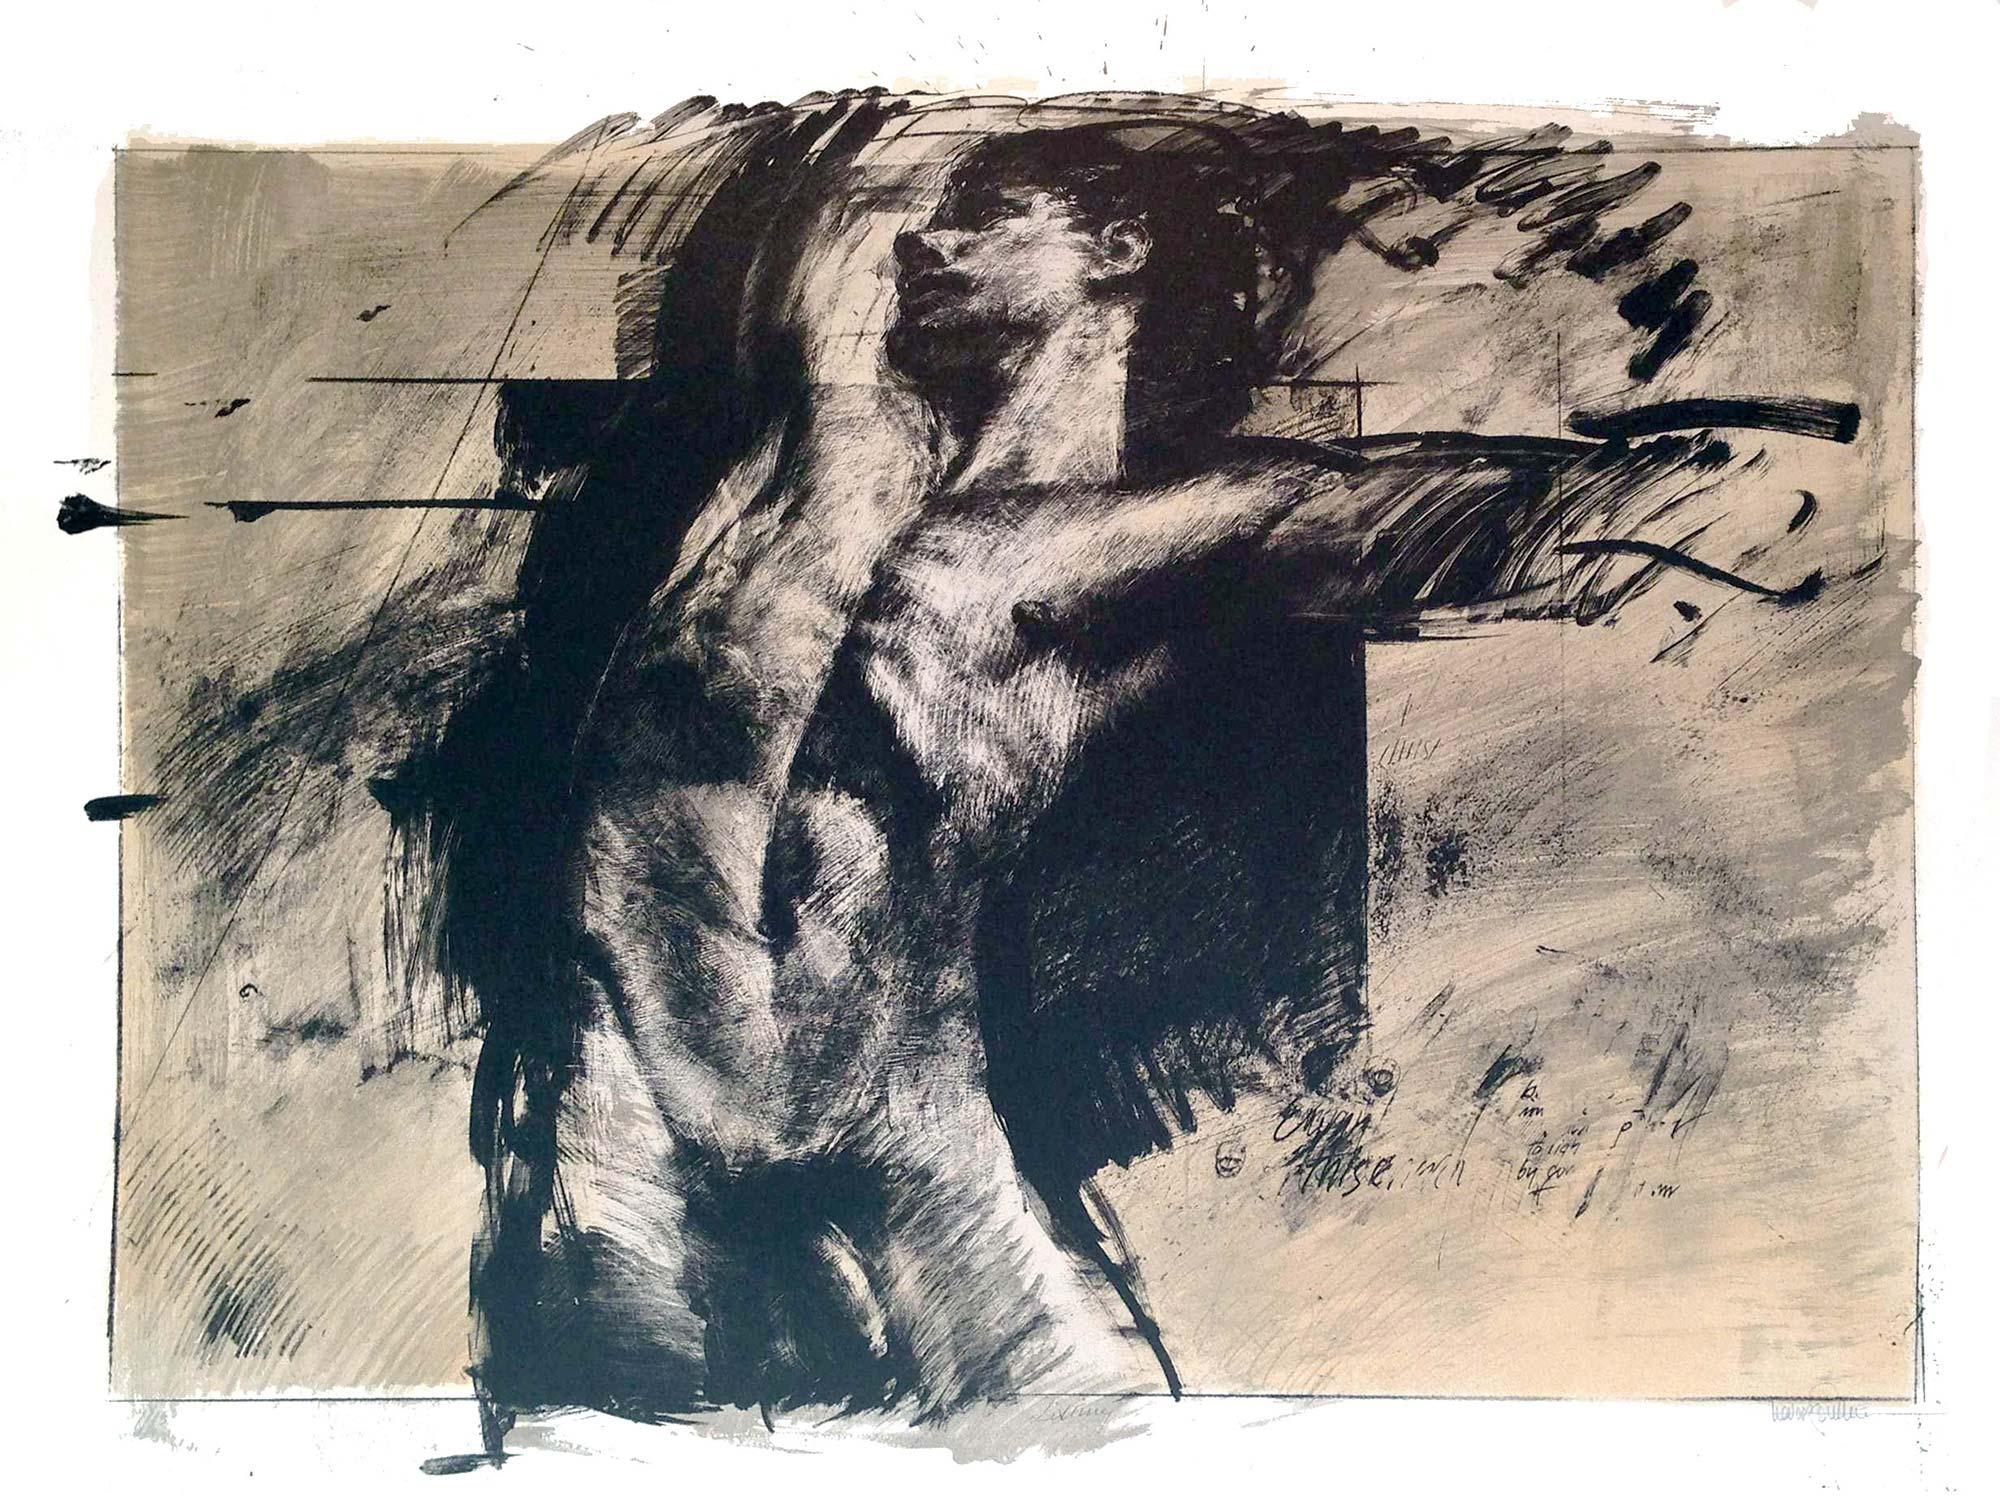 Signed, titled and numbered by the artist from the edition of 150. Male nude against an abstract background with predominantly black, tan and brown colors.

Trevor Southey was born in Rhodesia, Africa (now Zimbabwe) in 1940. His African heritage can